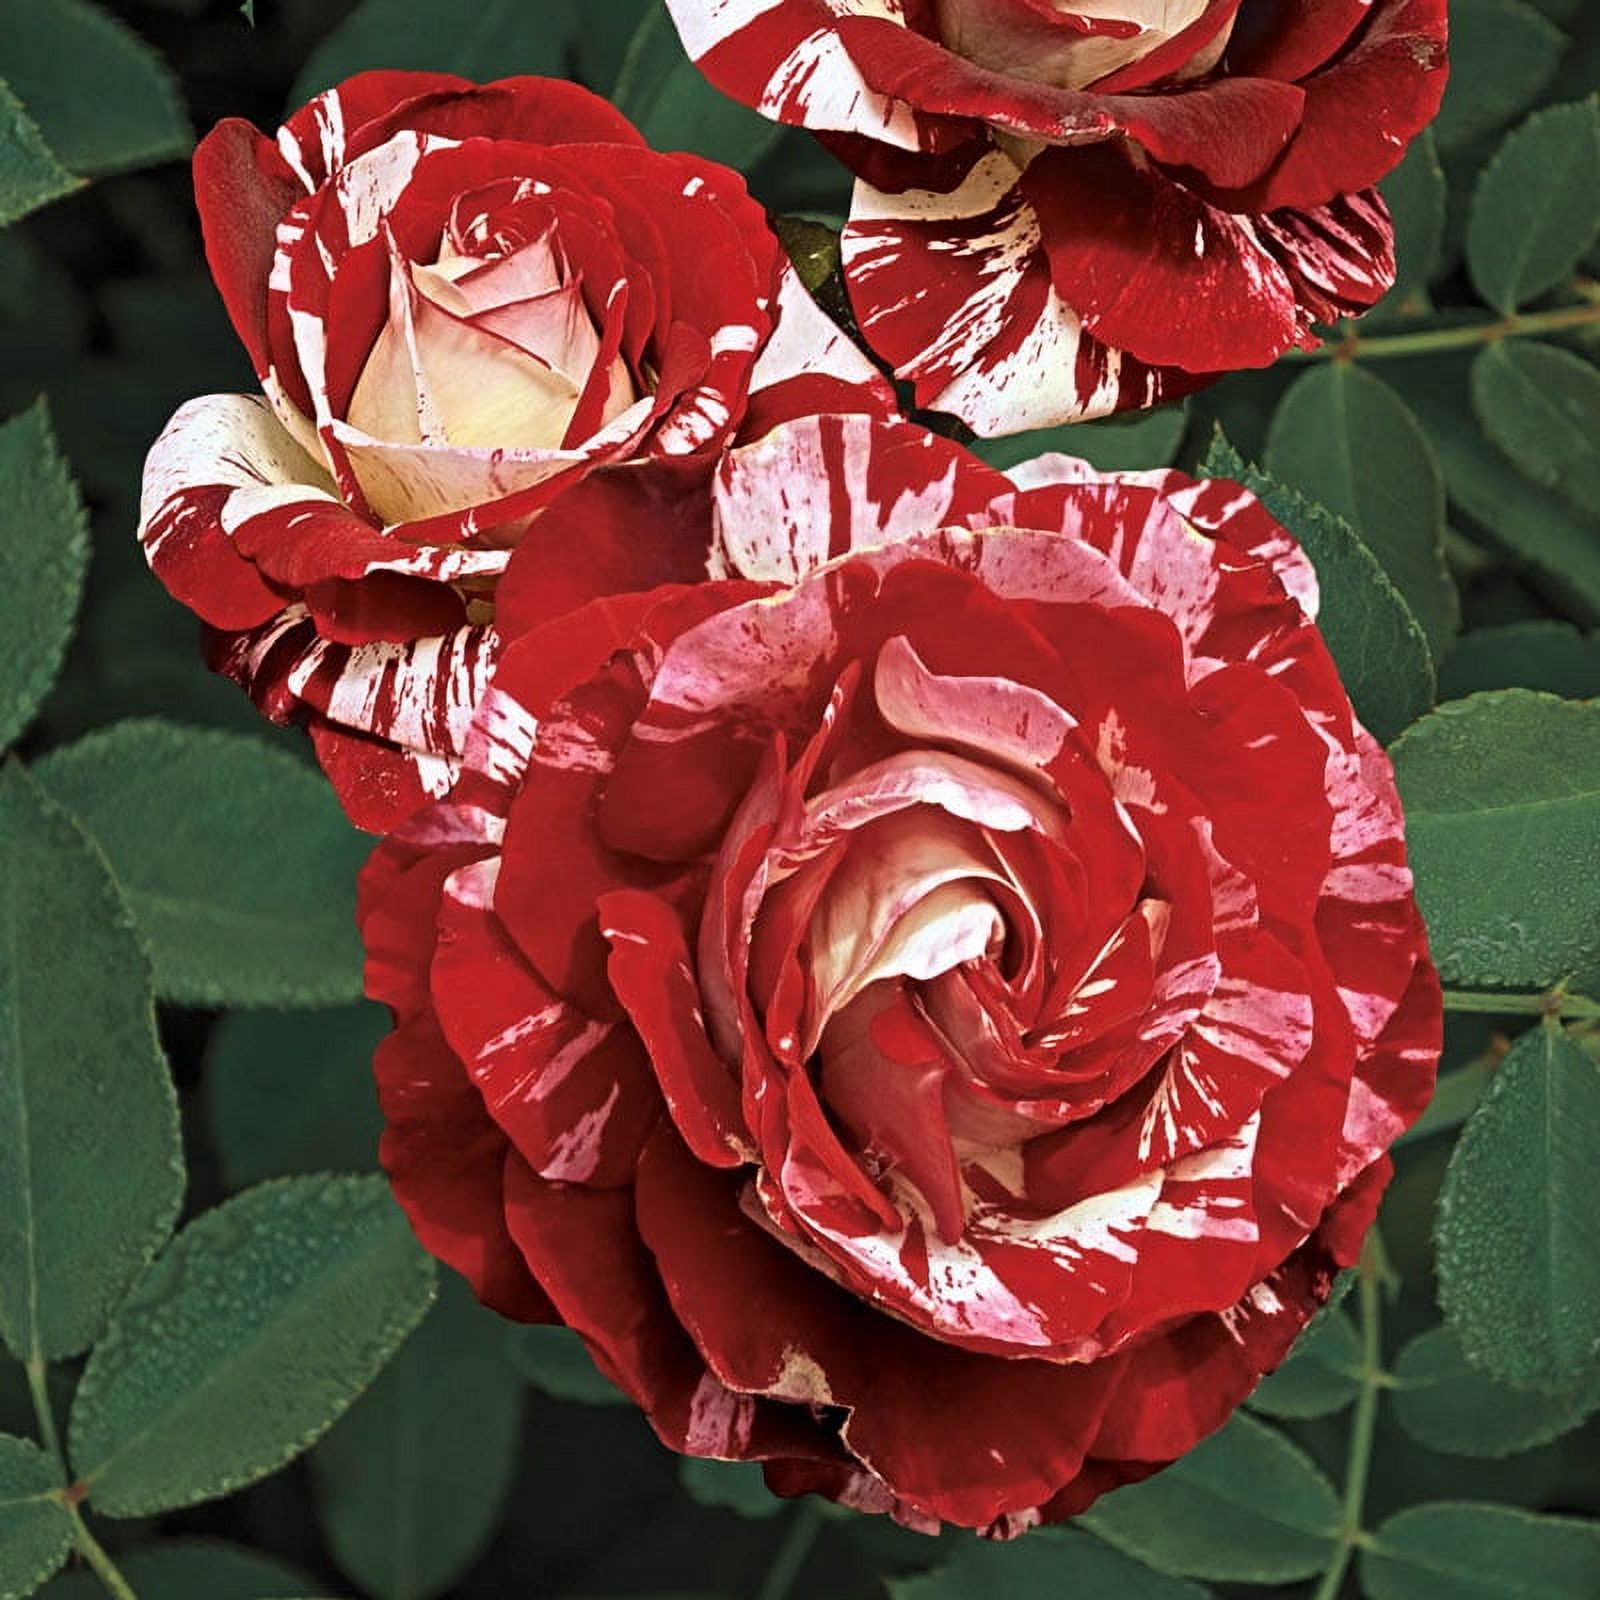 Rock and Roll Grandiflora Rose, 3 Gallon Potted Potted Flowering Plant (1-Pack) - image 1 of 2